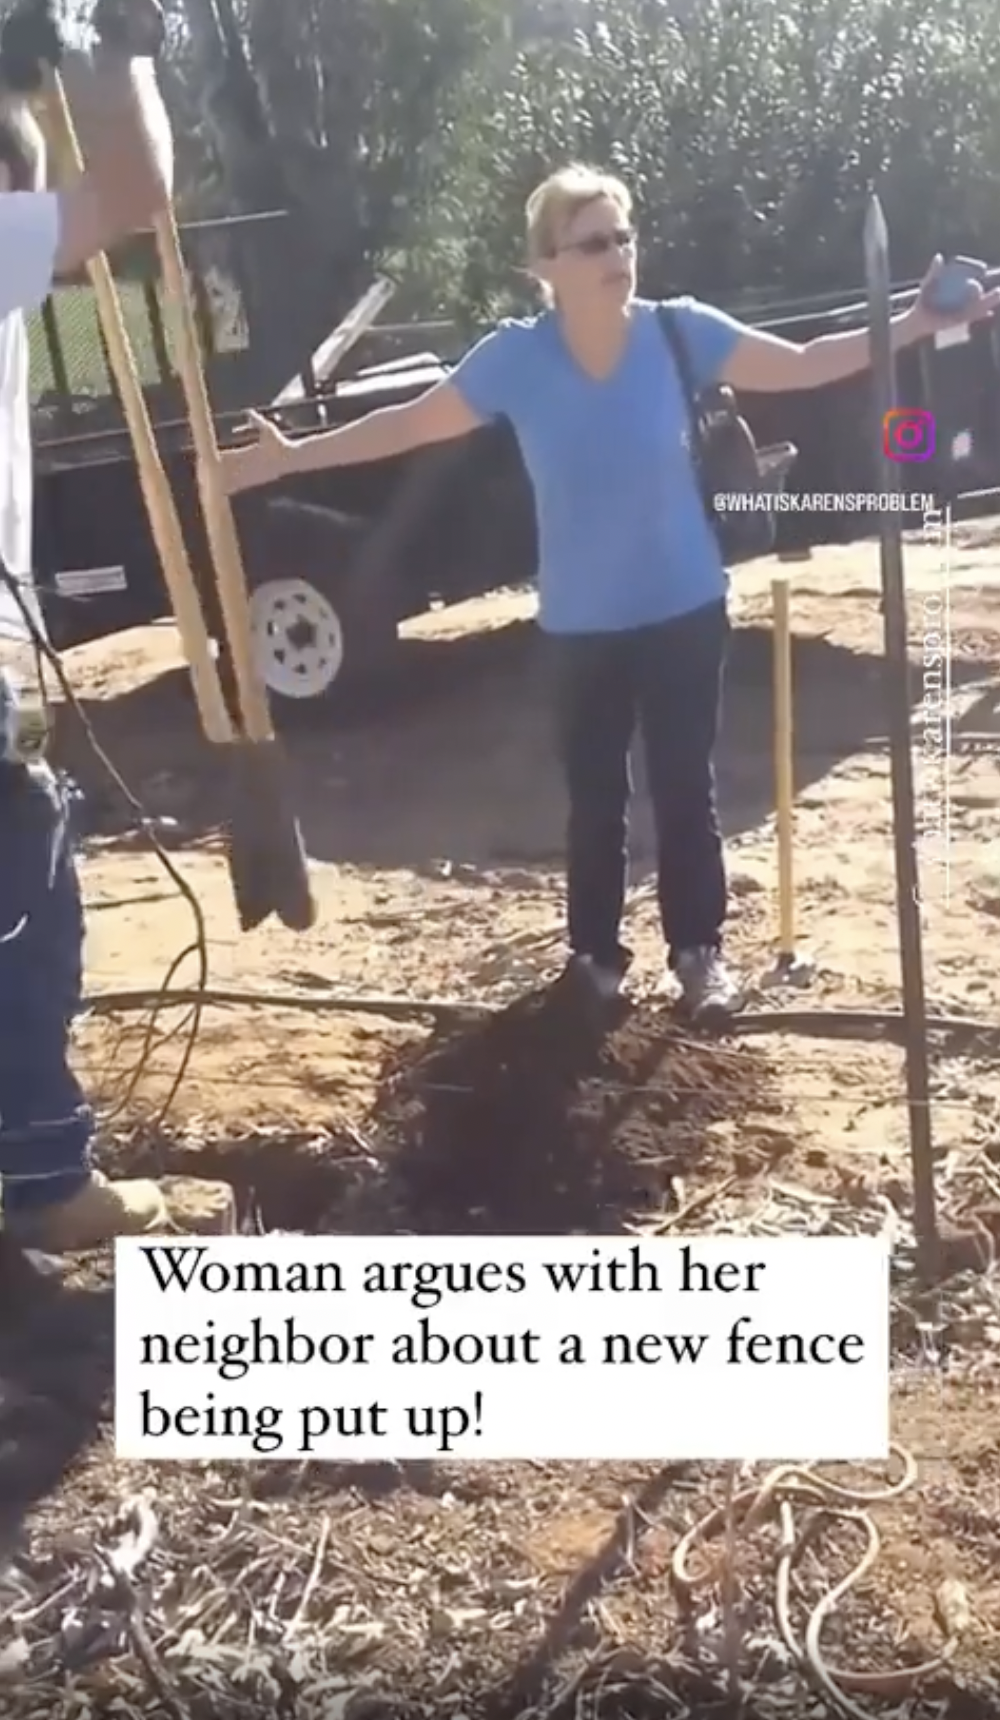 tree - Woman argues with her neighbor about a new fence being put up!